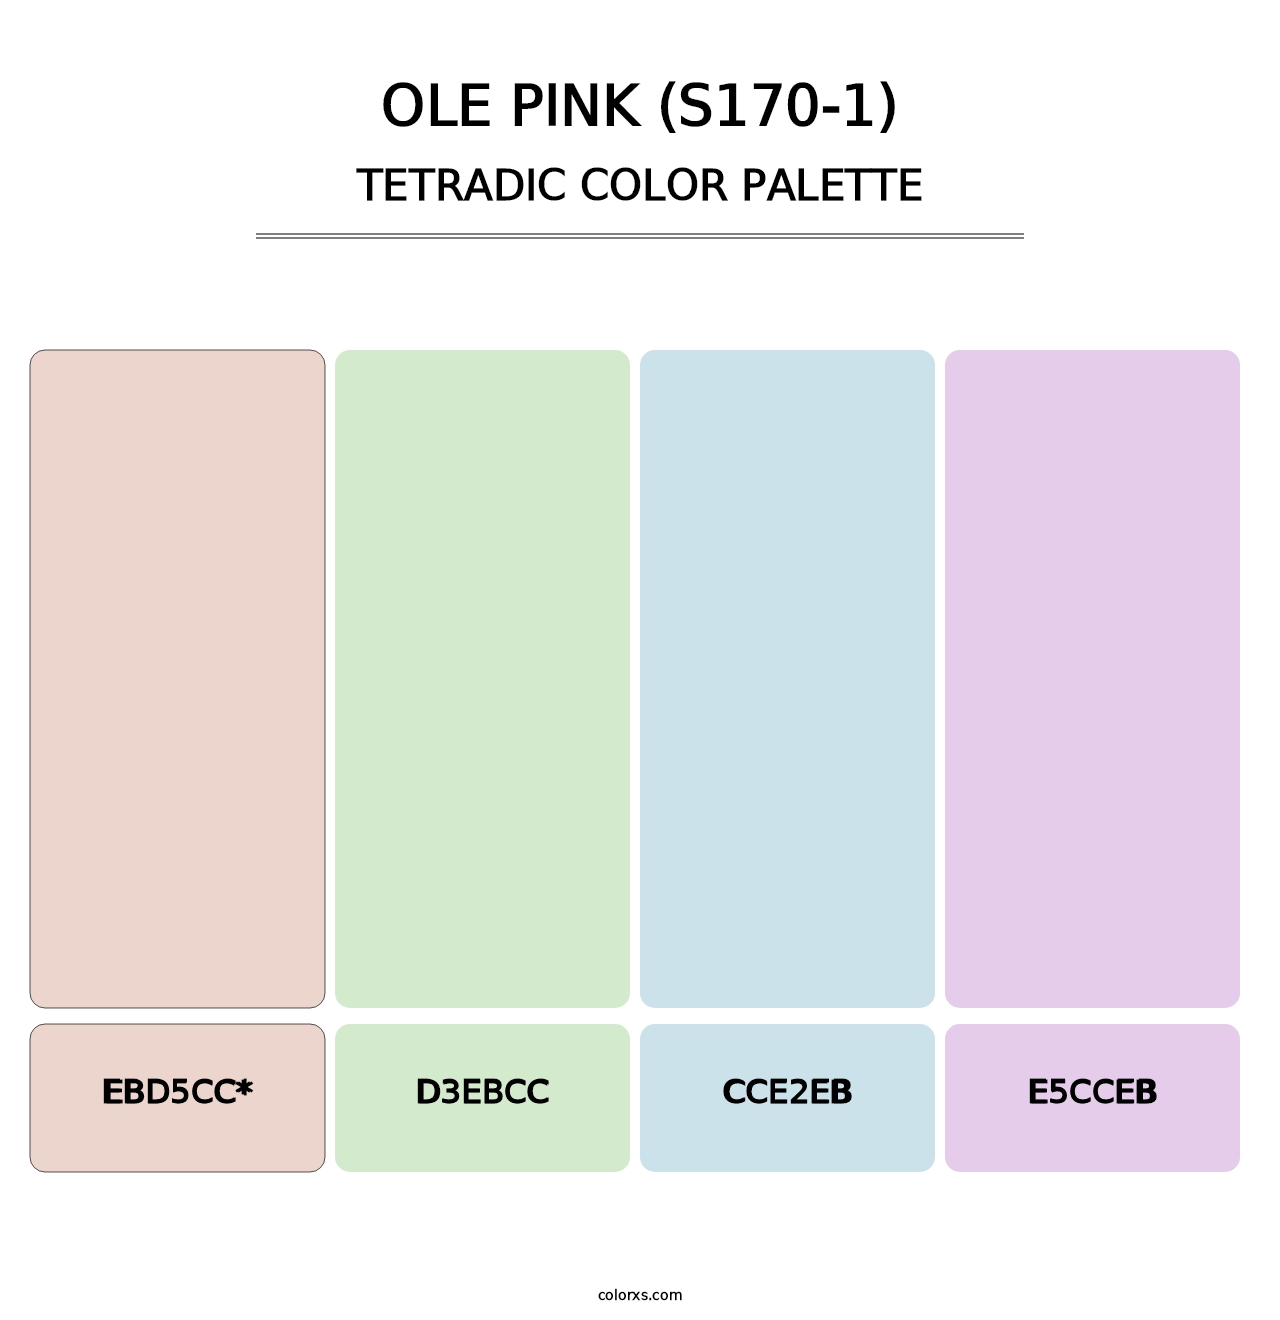 Ole Pink (S170-1) - Tetradic Color Palette